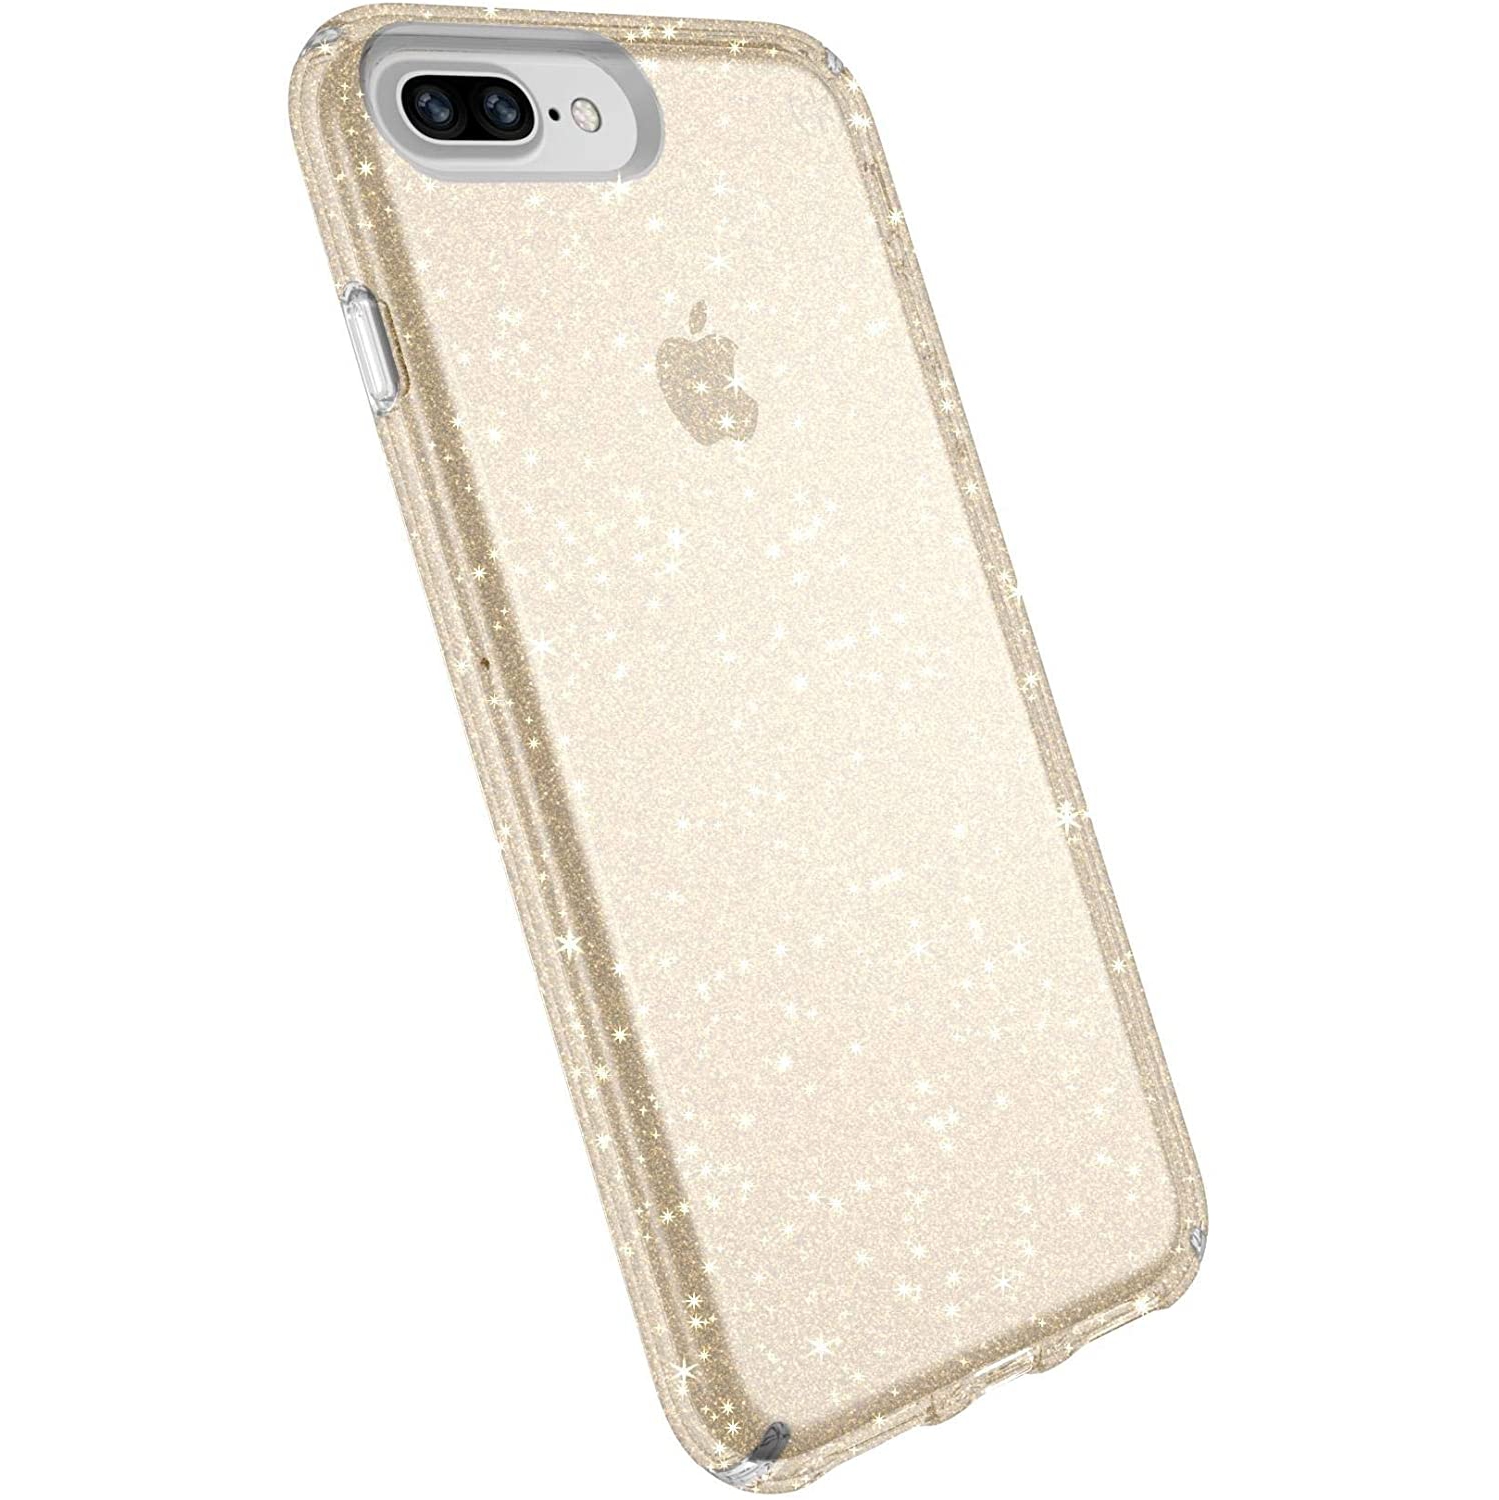 Presidio Clear + Glitter Case for iPhone 8 Plus (Also fits 7 Plus and 6S/6 Plus), Clear With Gold